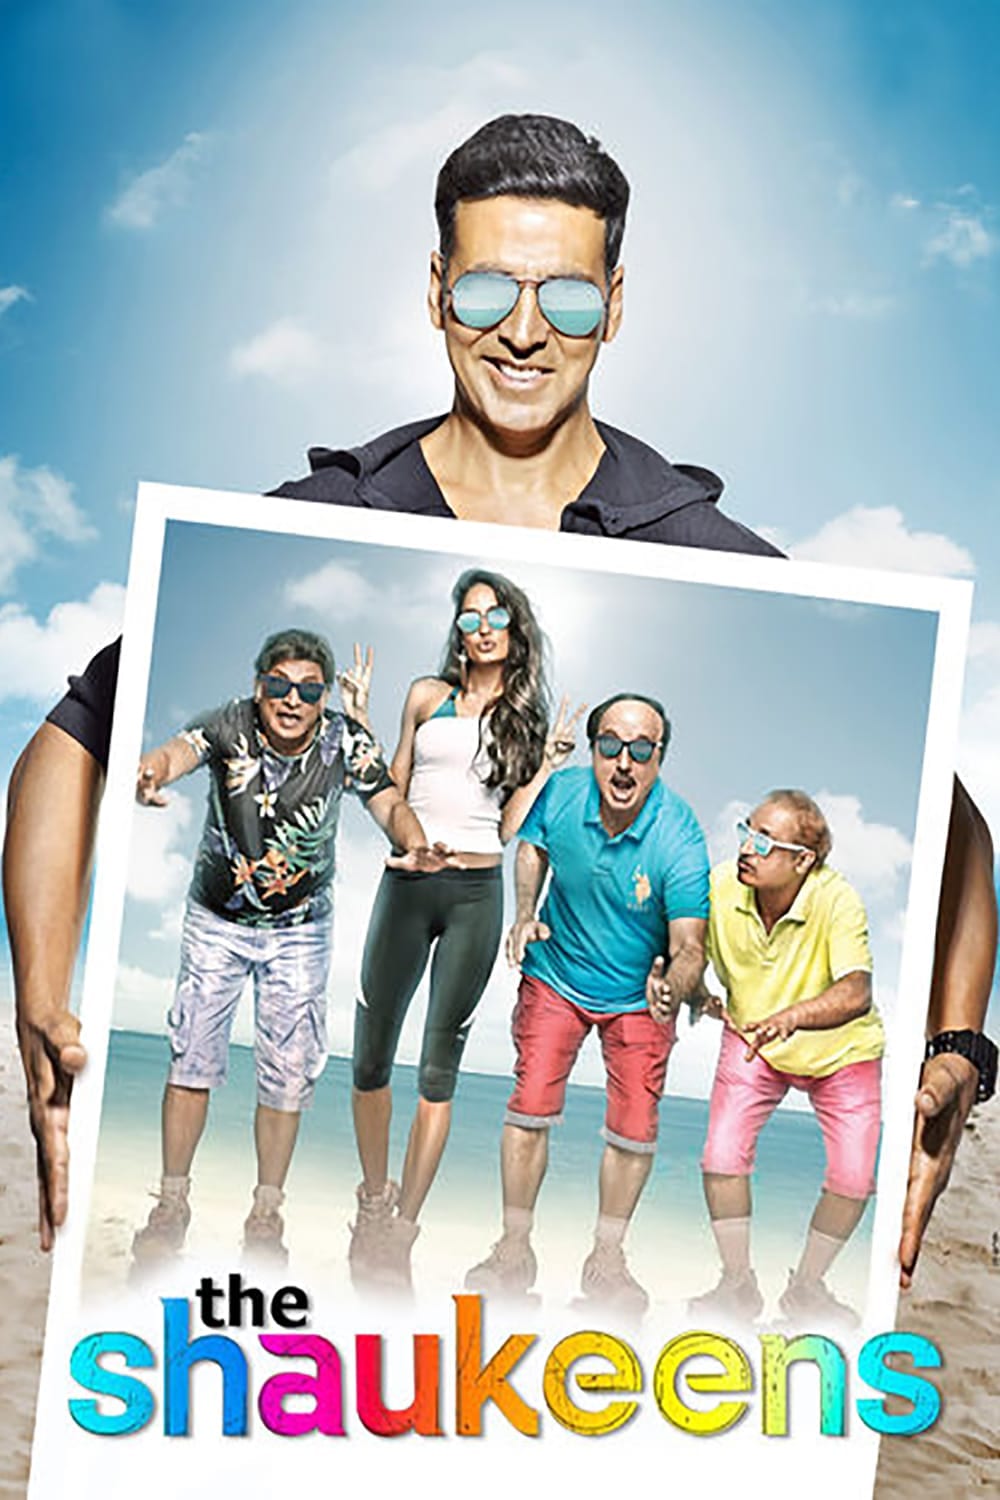 Poster for the movie "The Shaukeens"